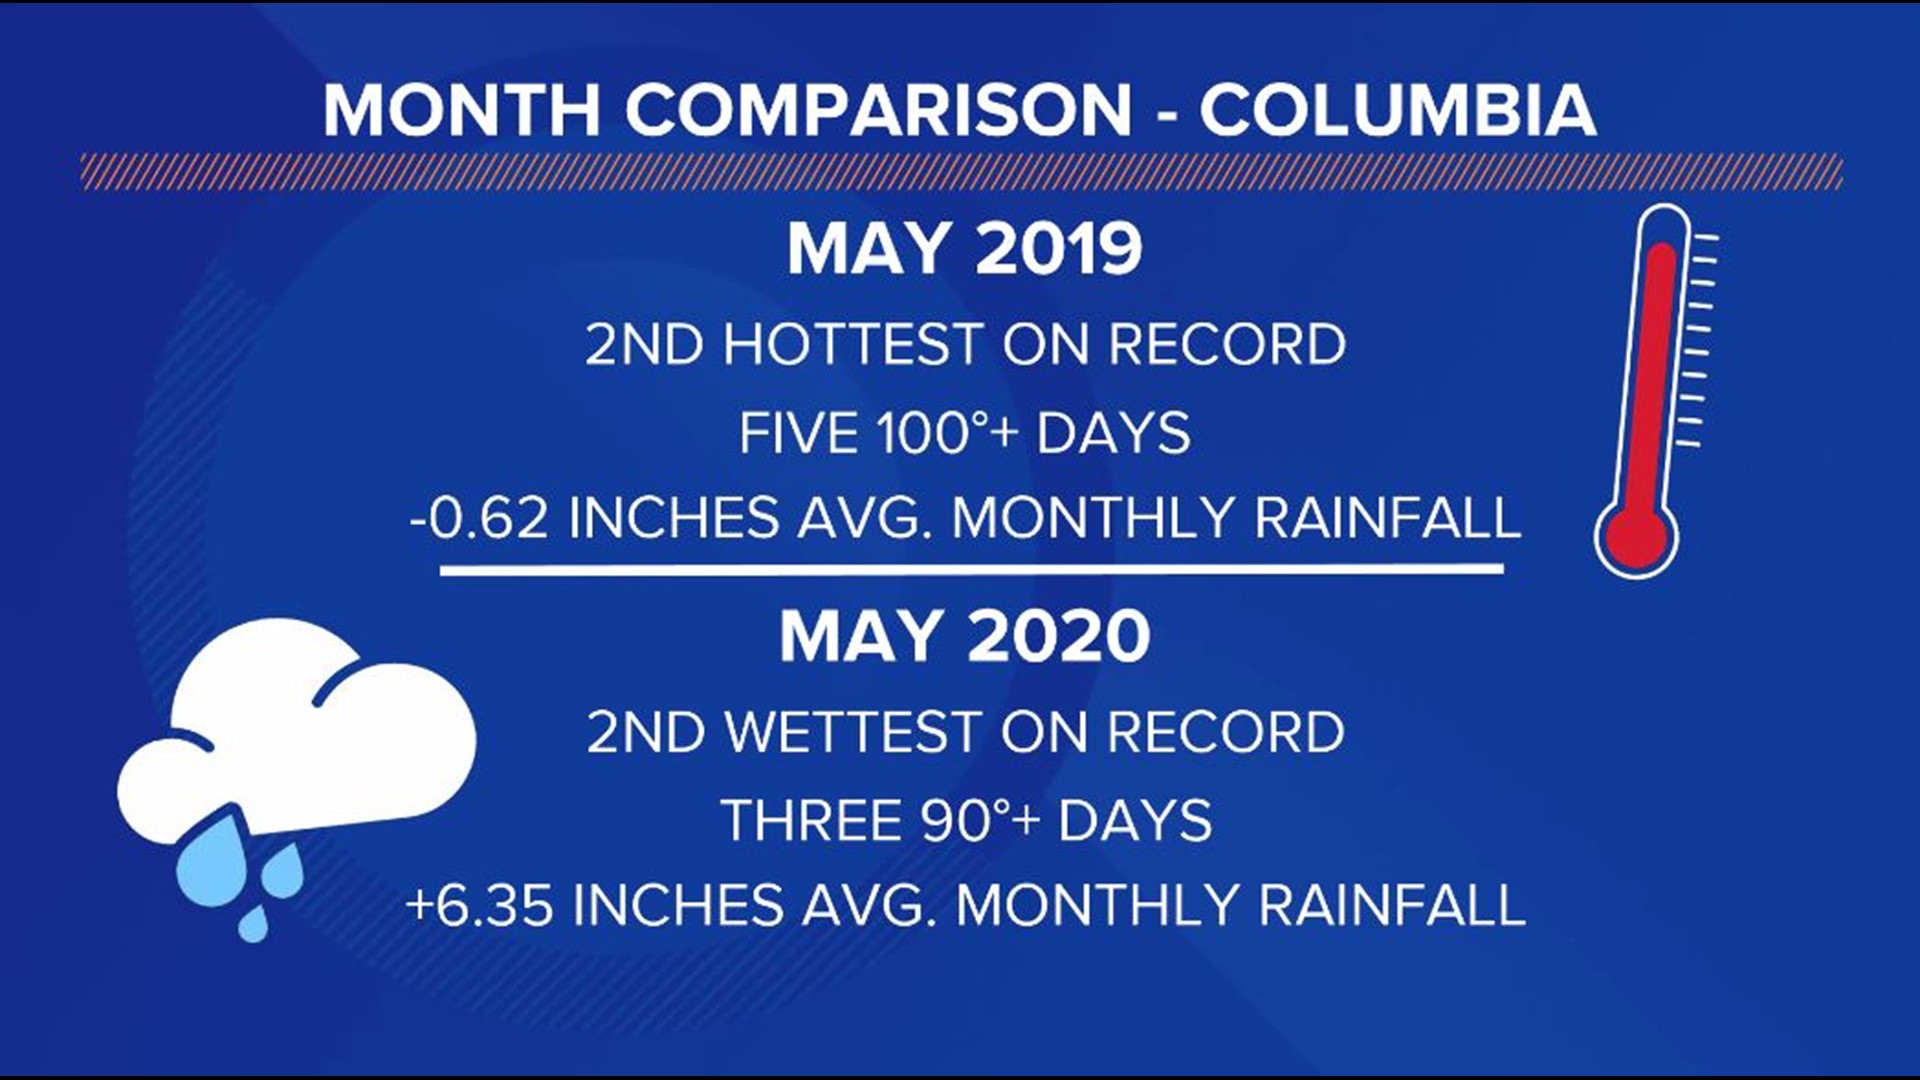 May was the second wettest on record! Plus temperatures were below normal.